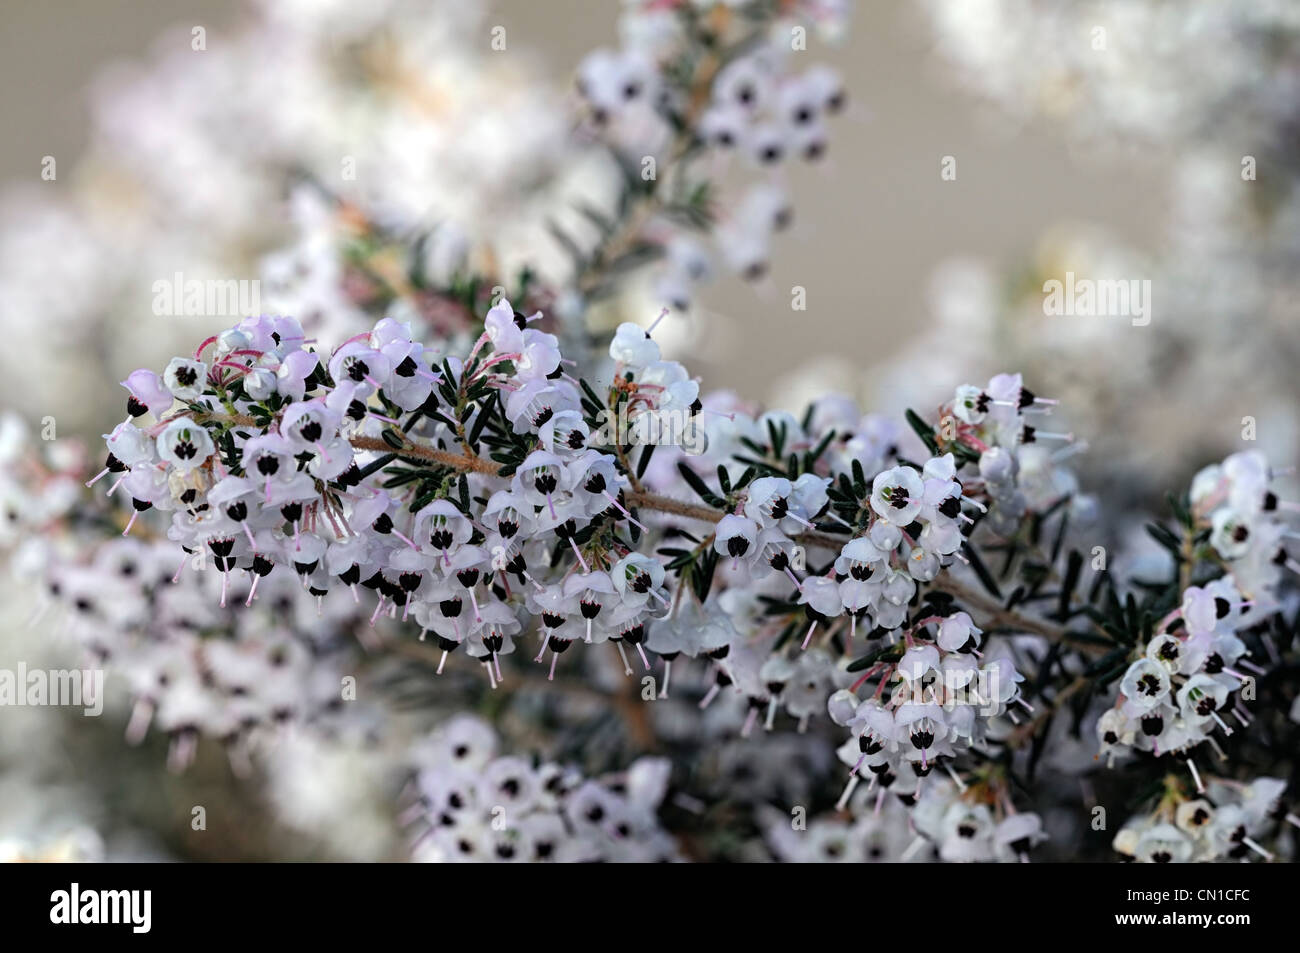 erica canaliculata alba channelled heather heathers pale pastel white flowers petals evergreens shrubs spring plant portraits Stock Photo